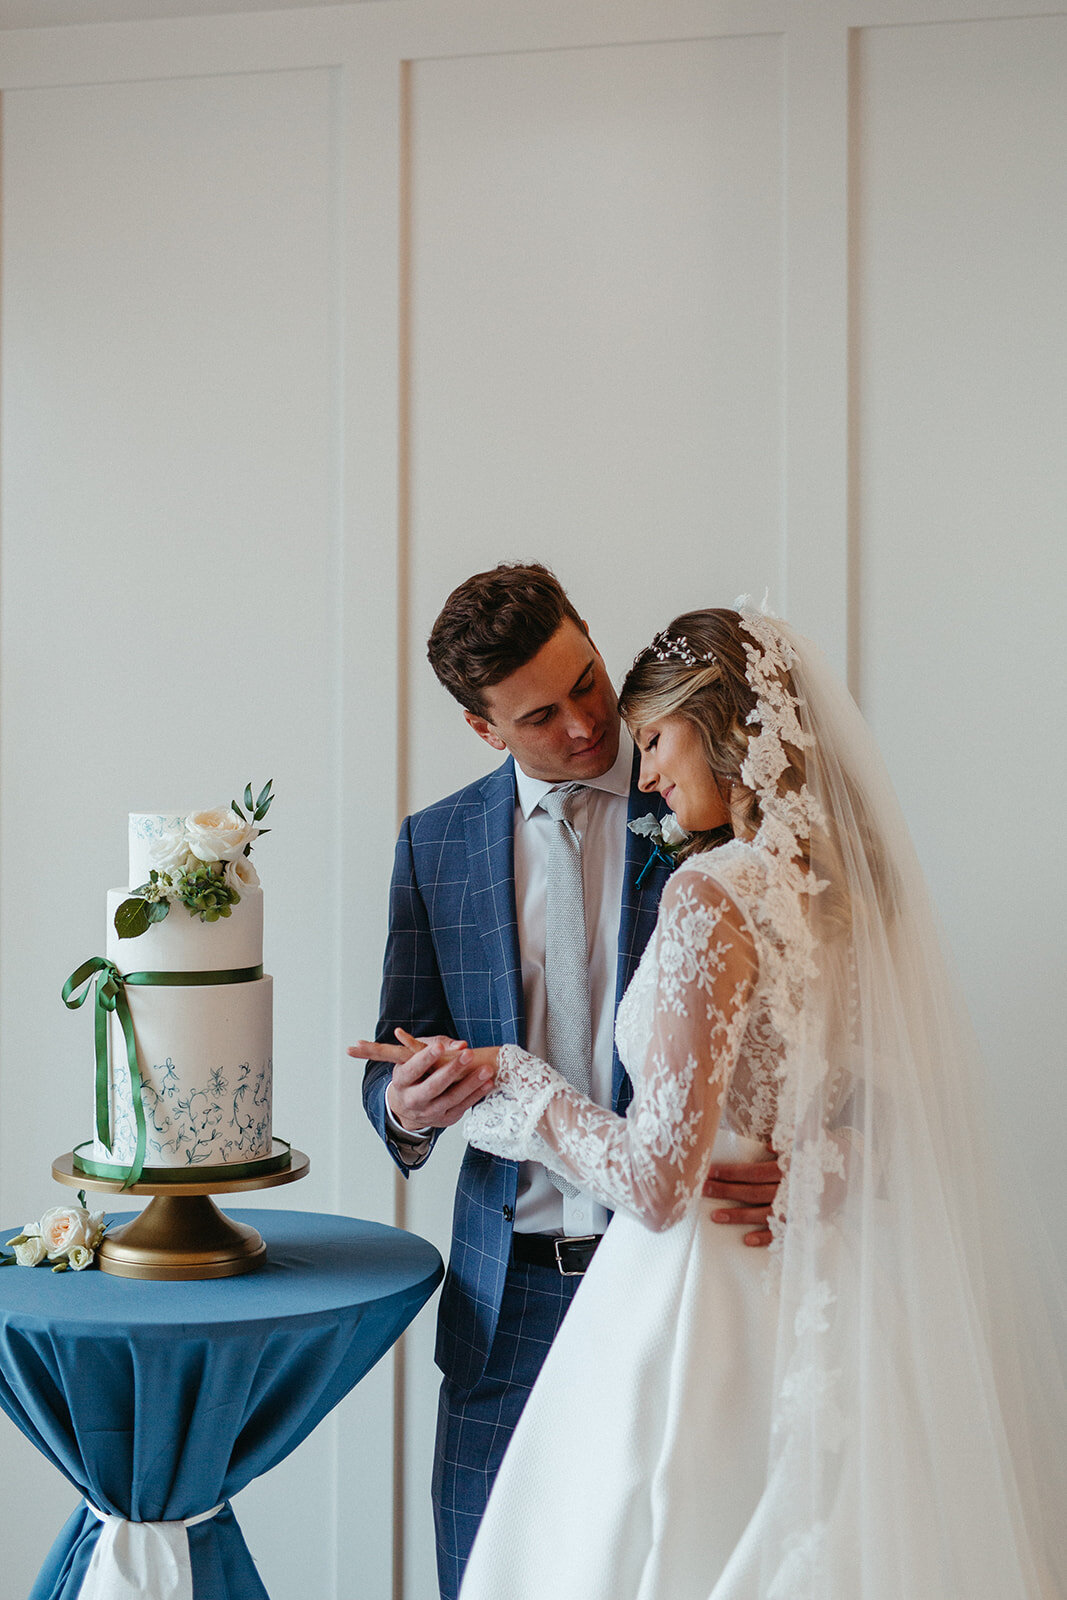 Bride and groom in a blue suit and white wedding gown next to a layered cake on gold cake stand atop a round table.